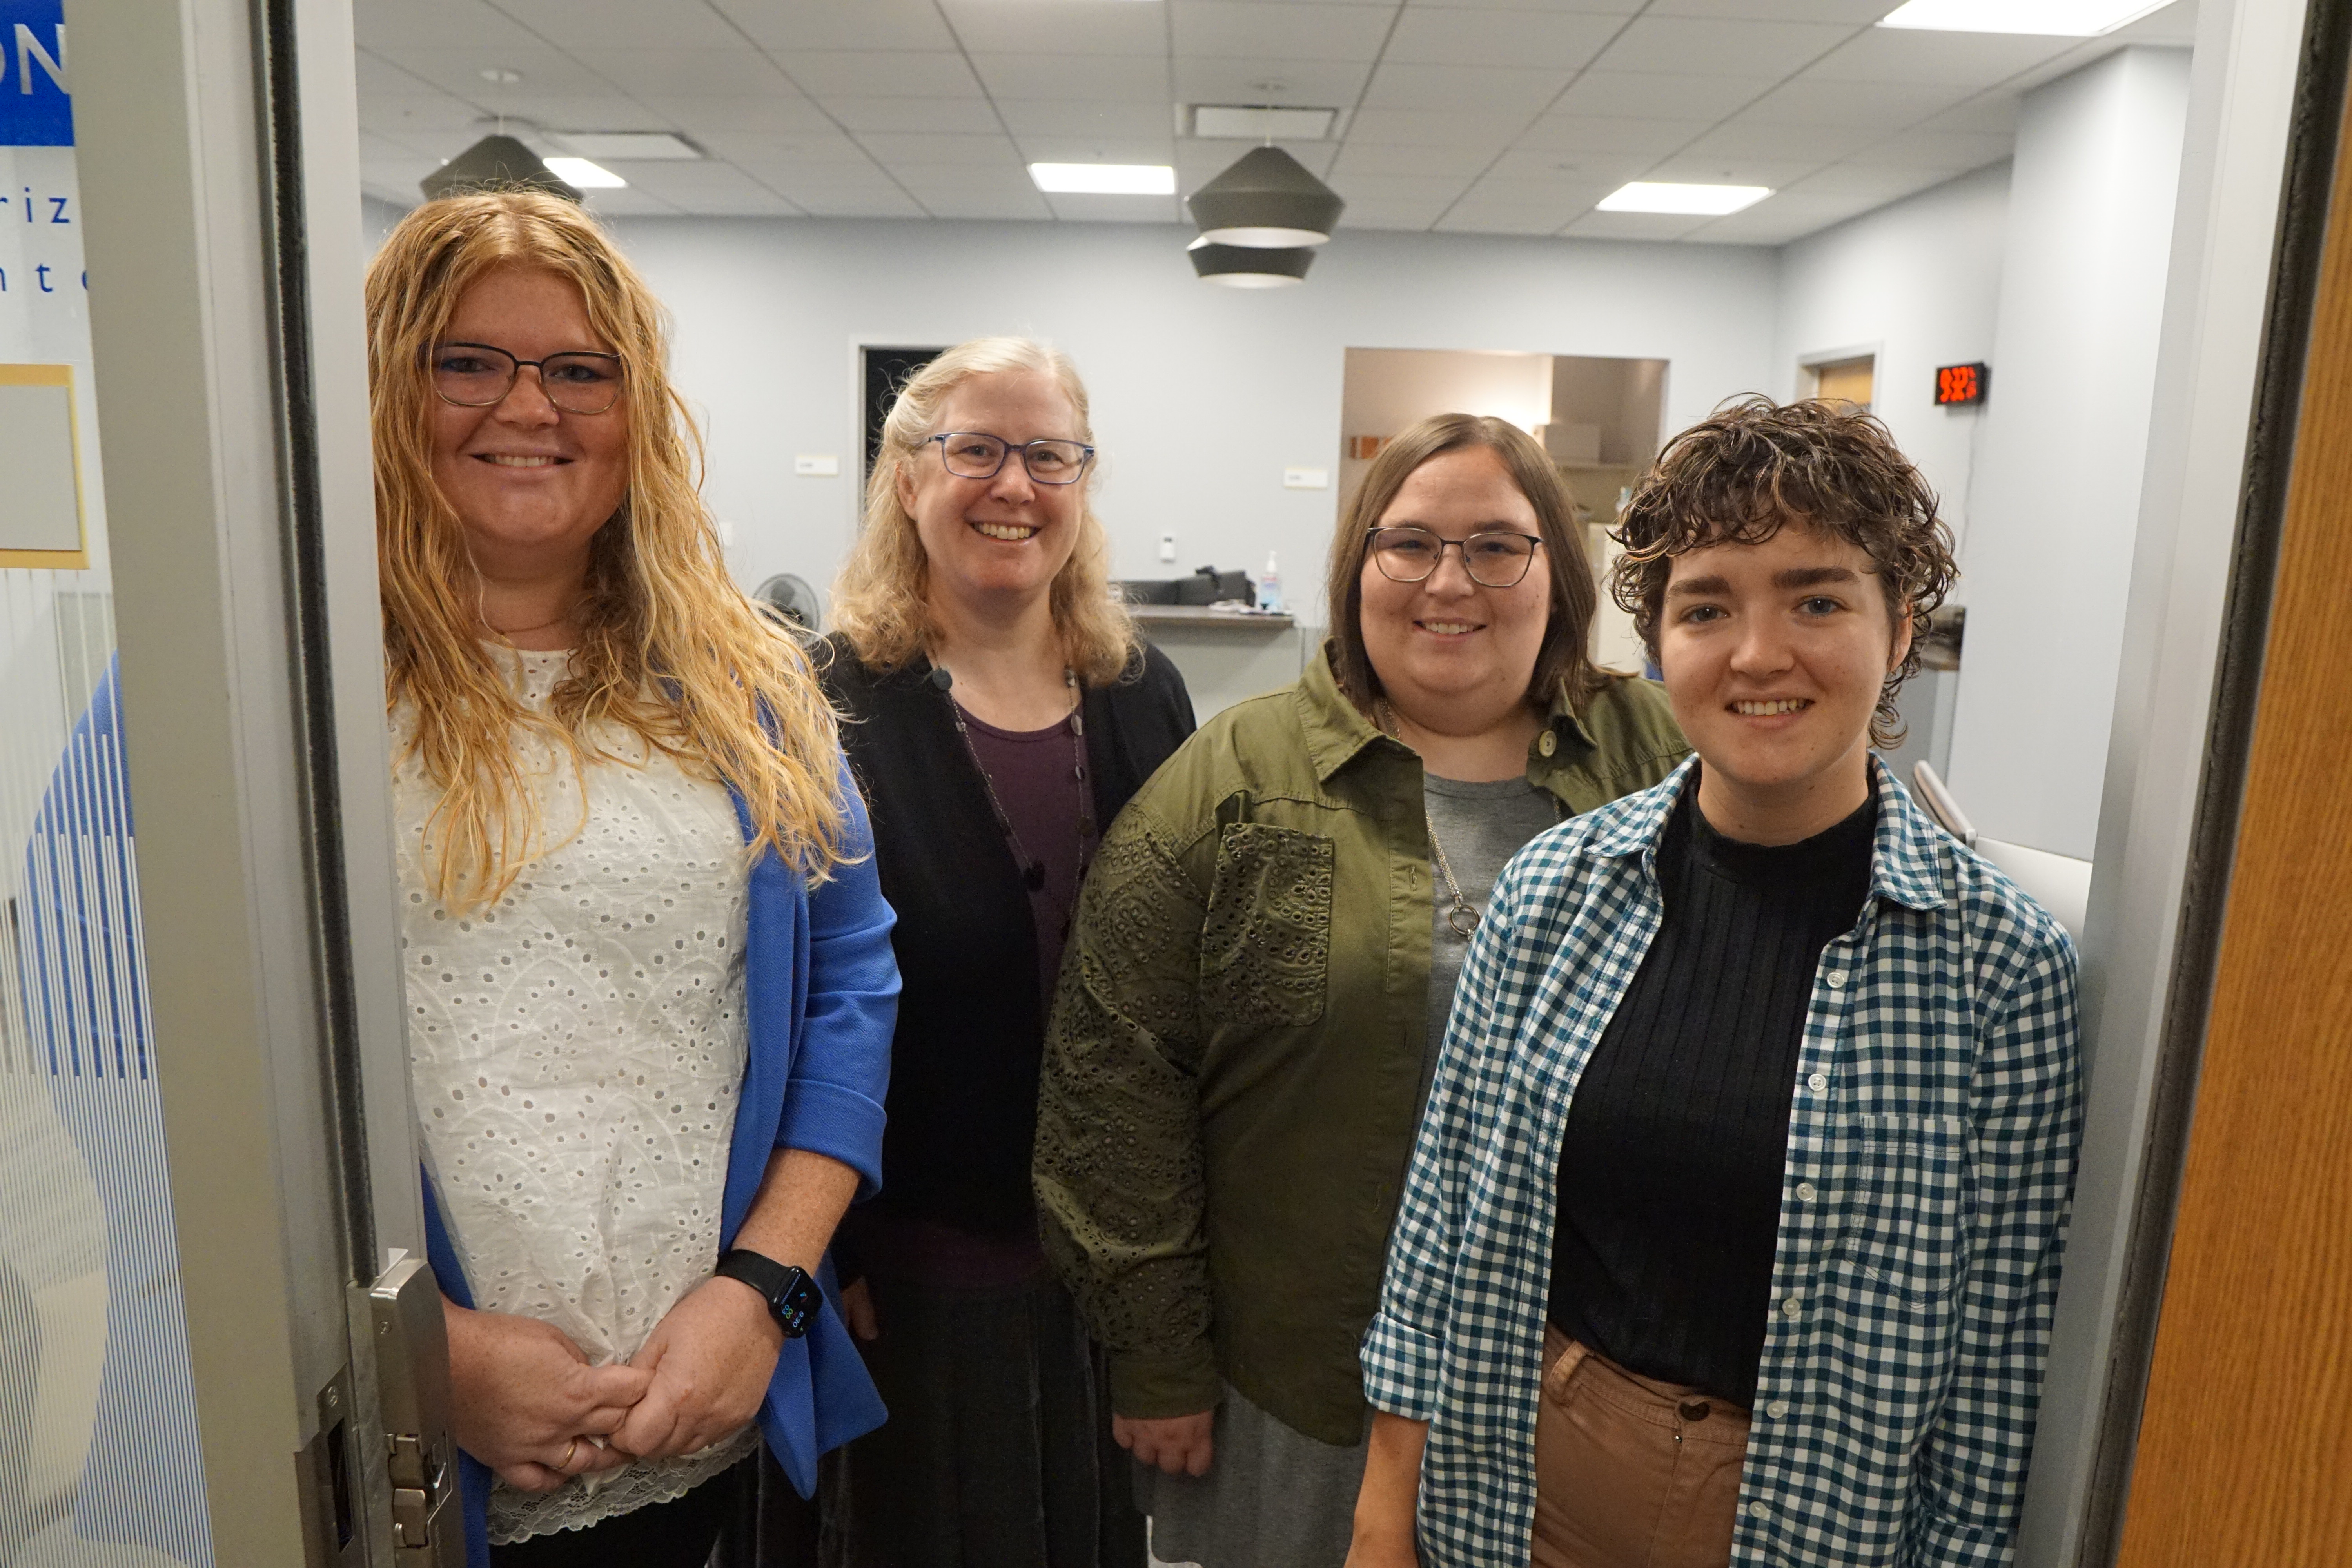 Purdue Testing Services staff stand for a team picture in their new space in Stewart Center. From left to right: Kelsey Jordan, Bahiyyih Baker, Maddie Kintner, and Heather Johnson